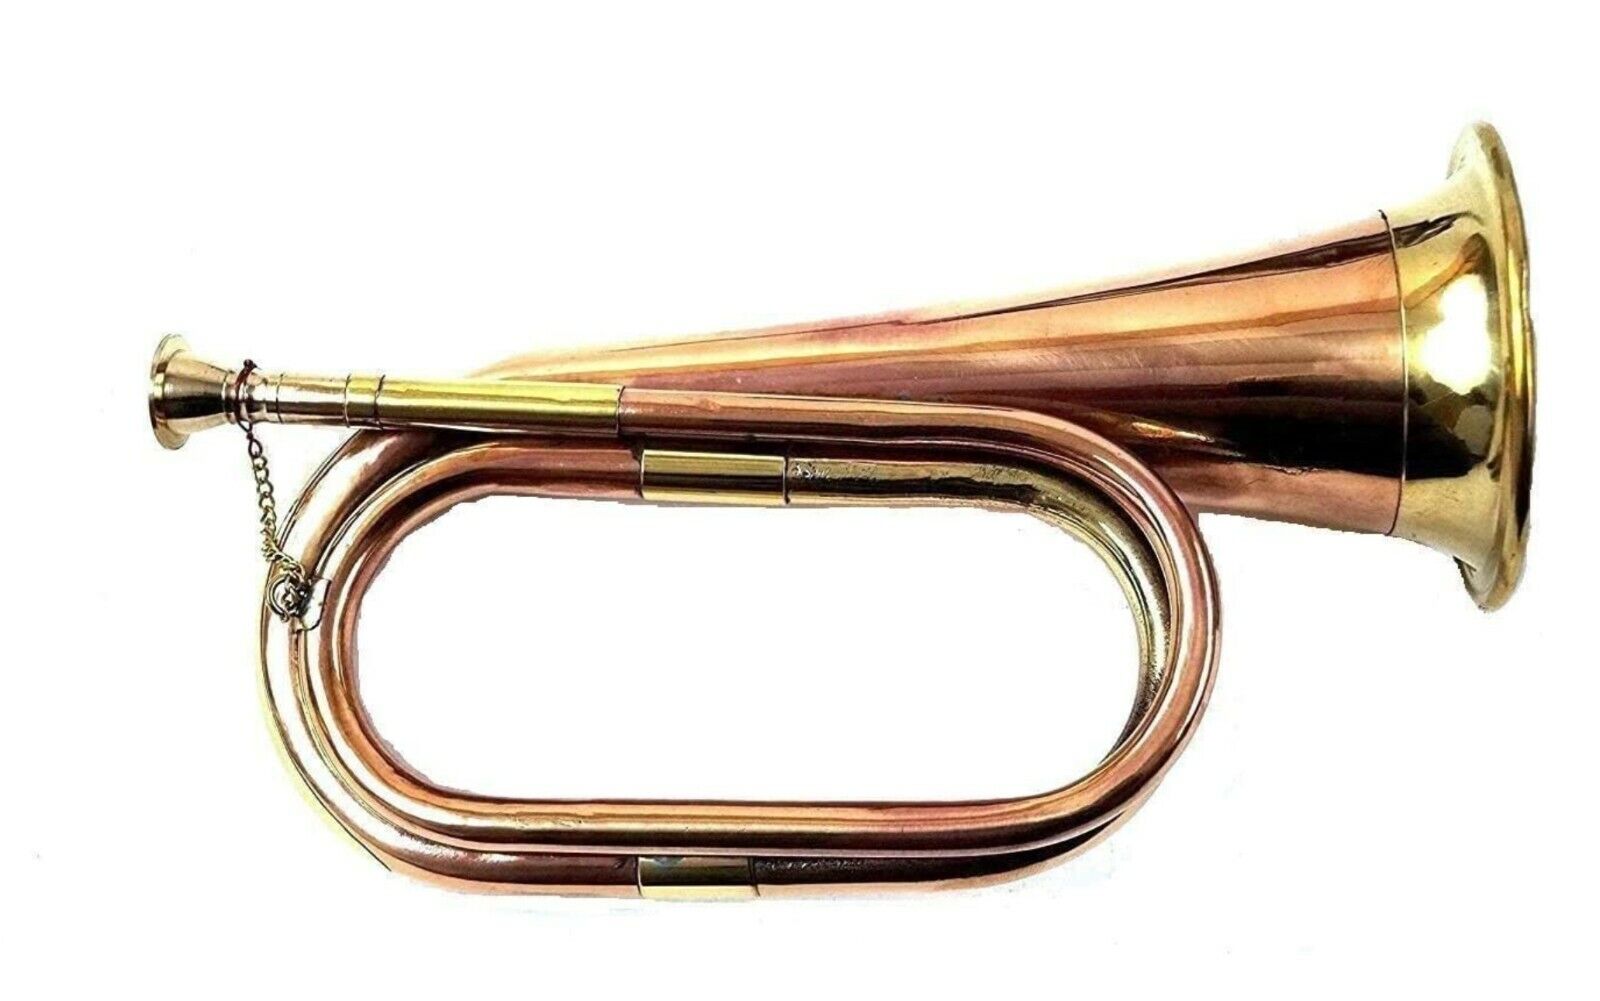 Real Full Size Pure Brass Bugle To Play Brown For School Band Cavalry Miltary